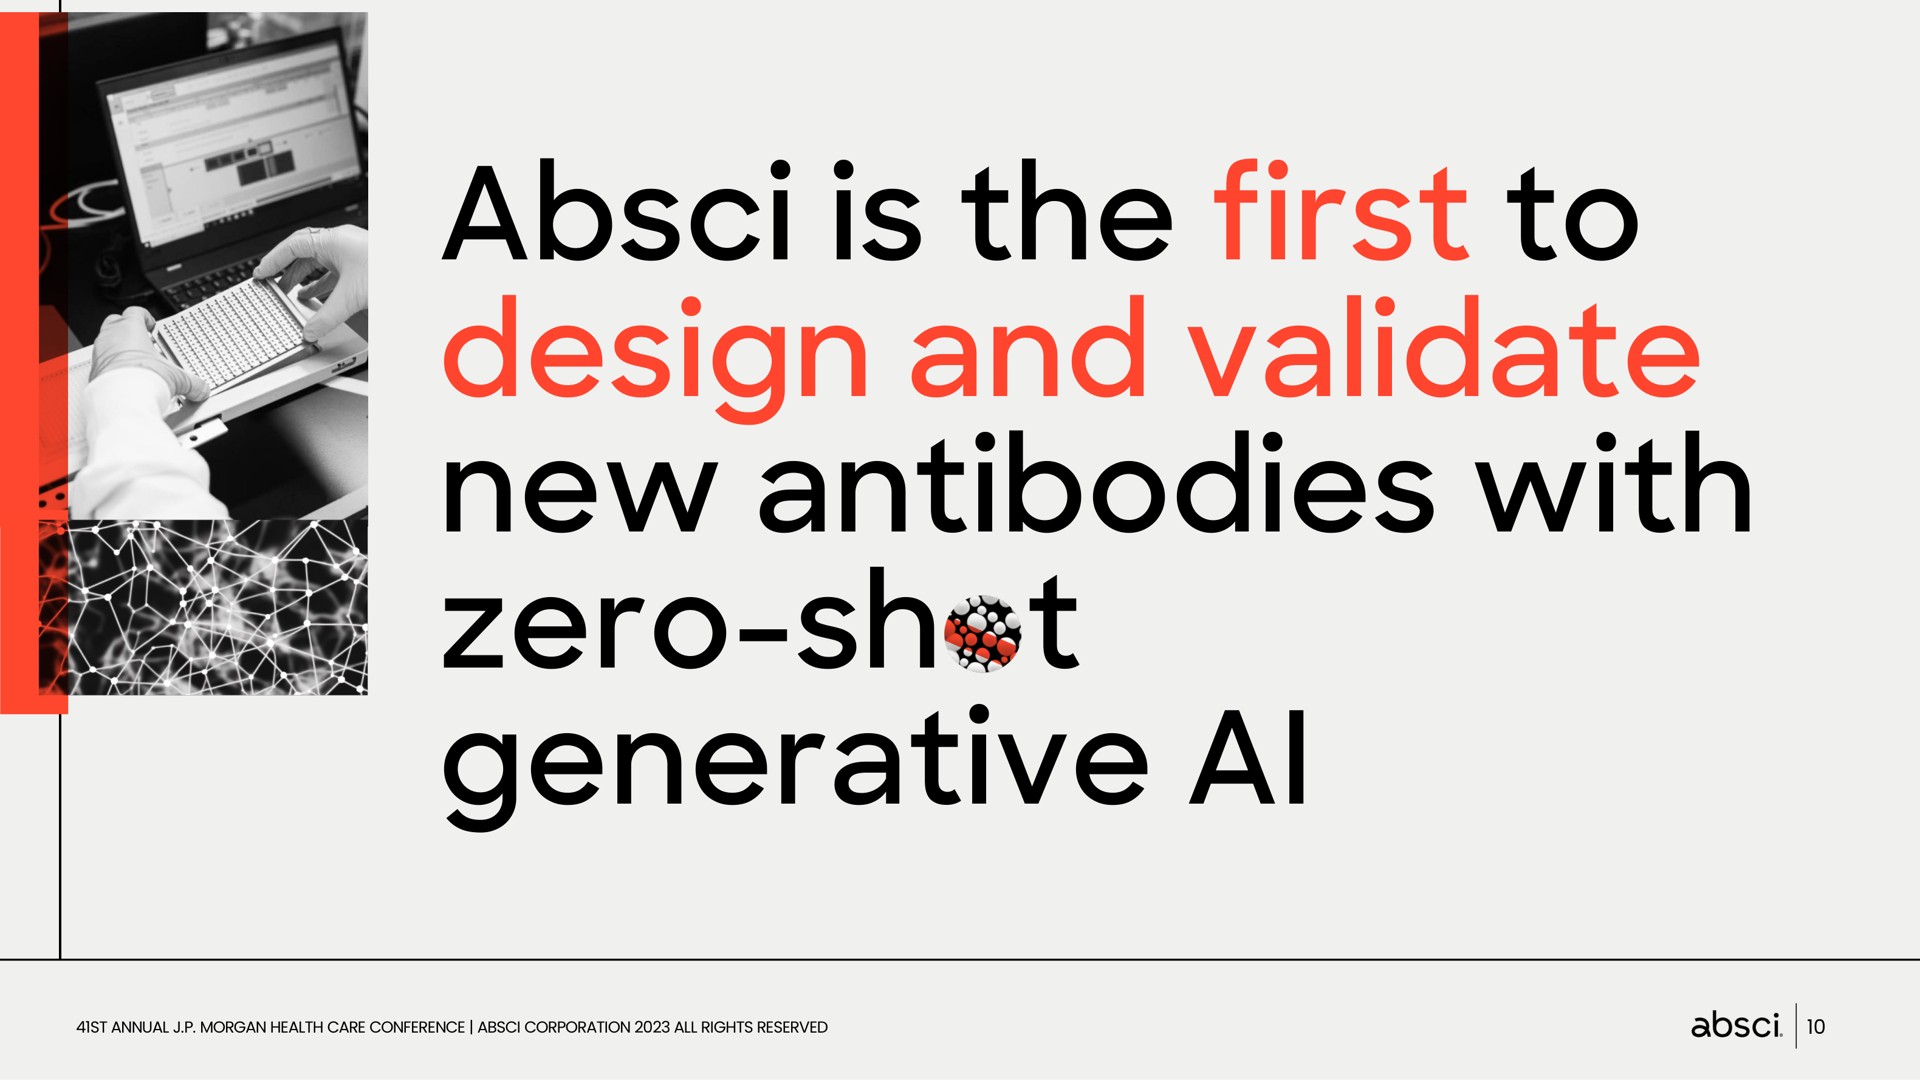 is the first to design and validate new antibodies with zero shot generative zero | Absci